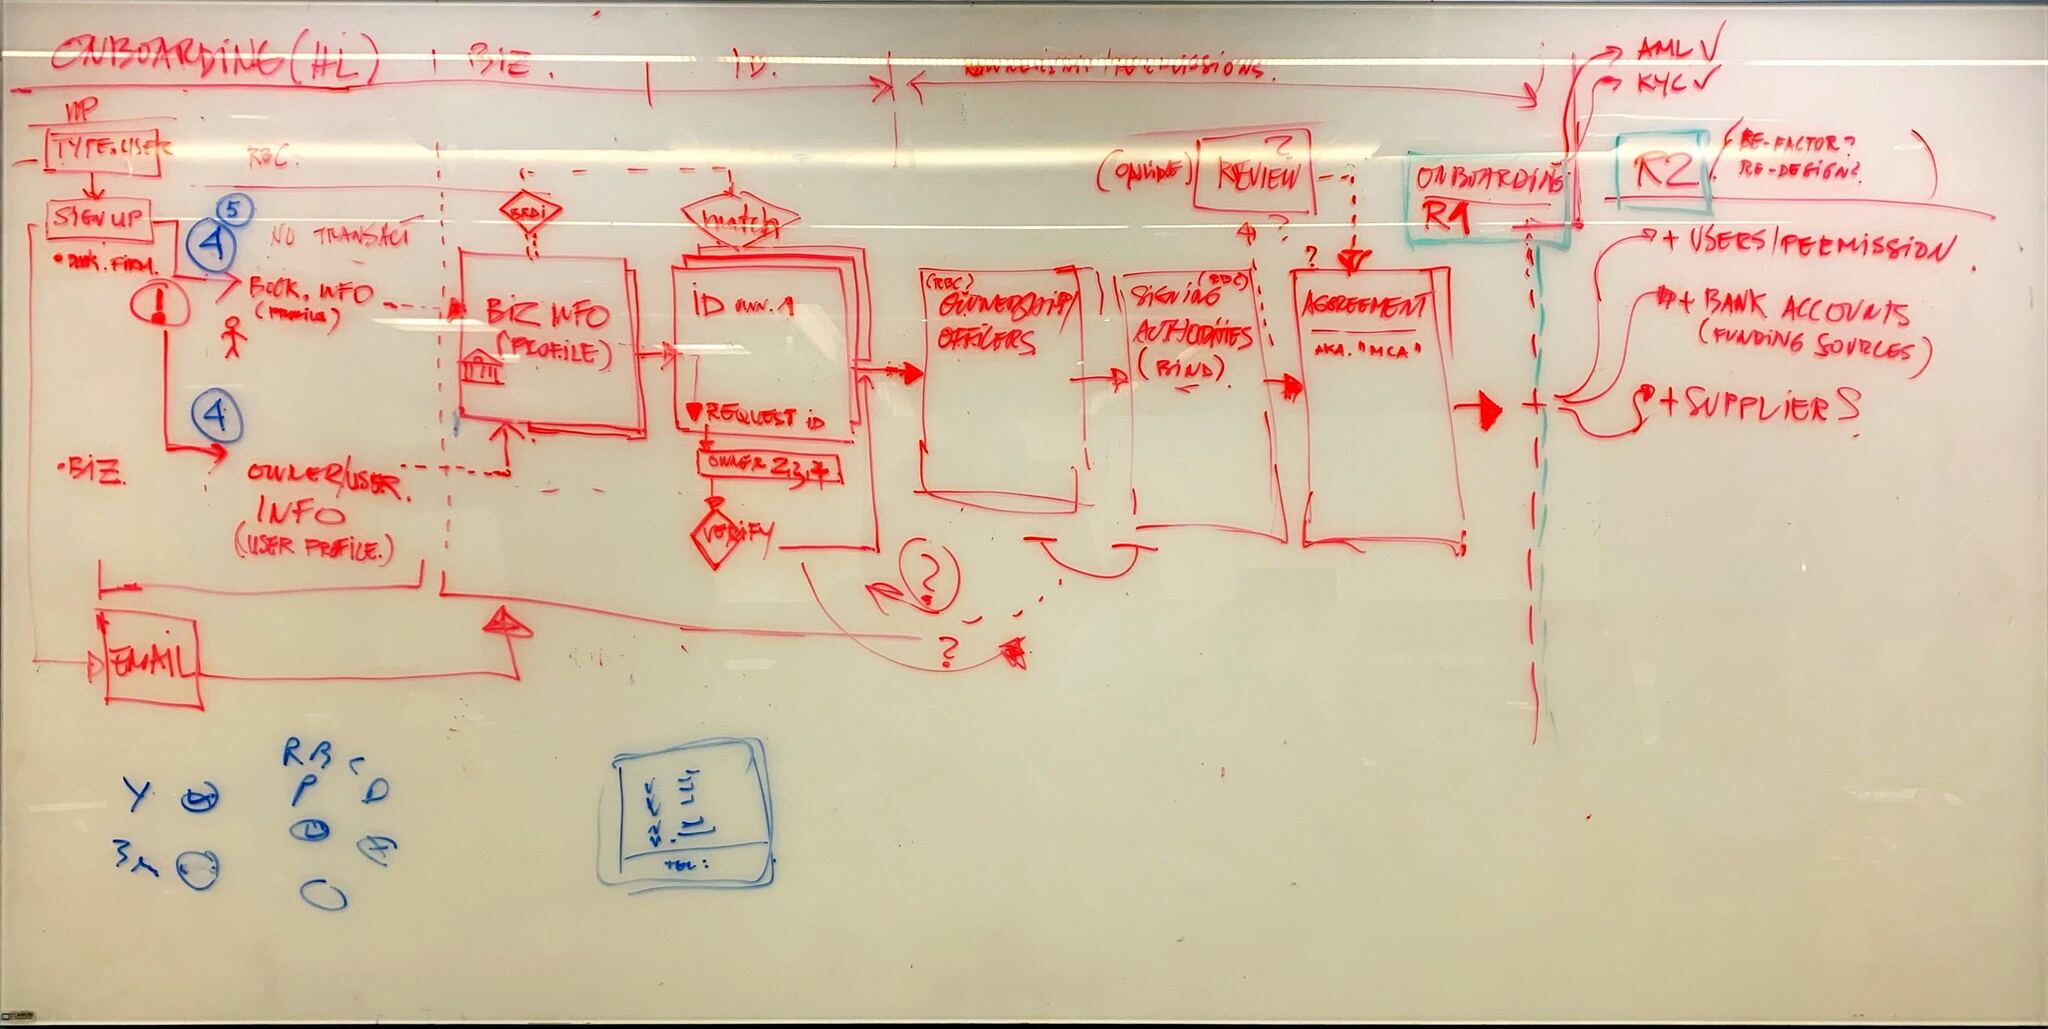 Whiteboard sketches of RBC PayEdge Onboarding project